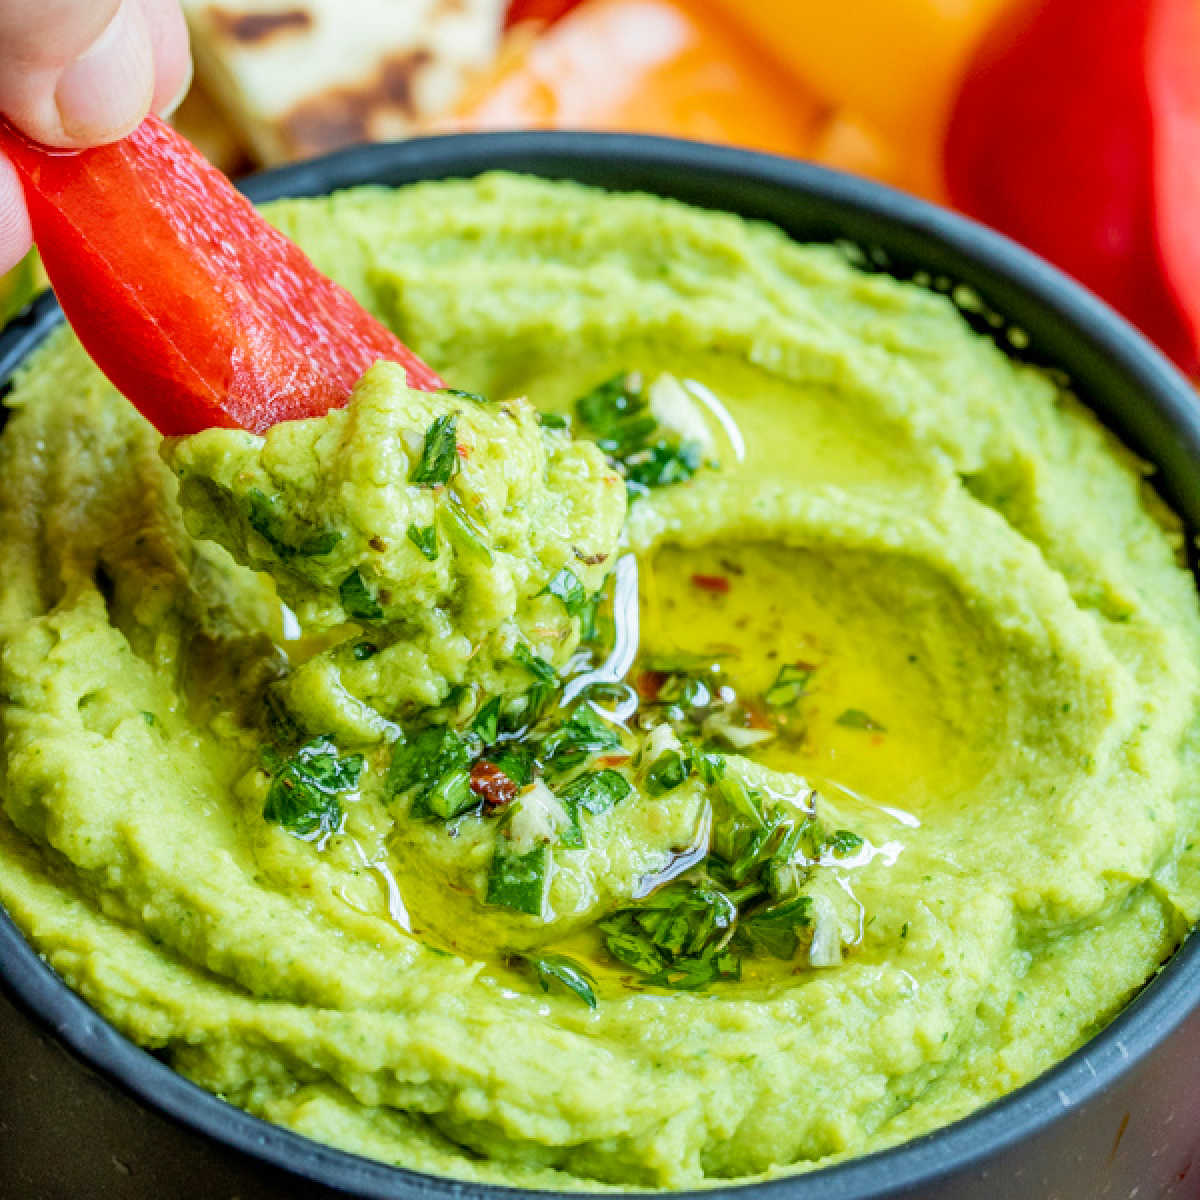 dipping into Avocado Hummus with a pepper